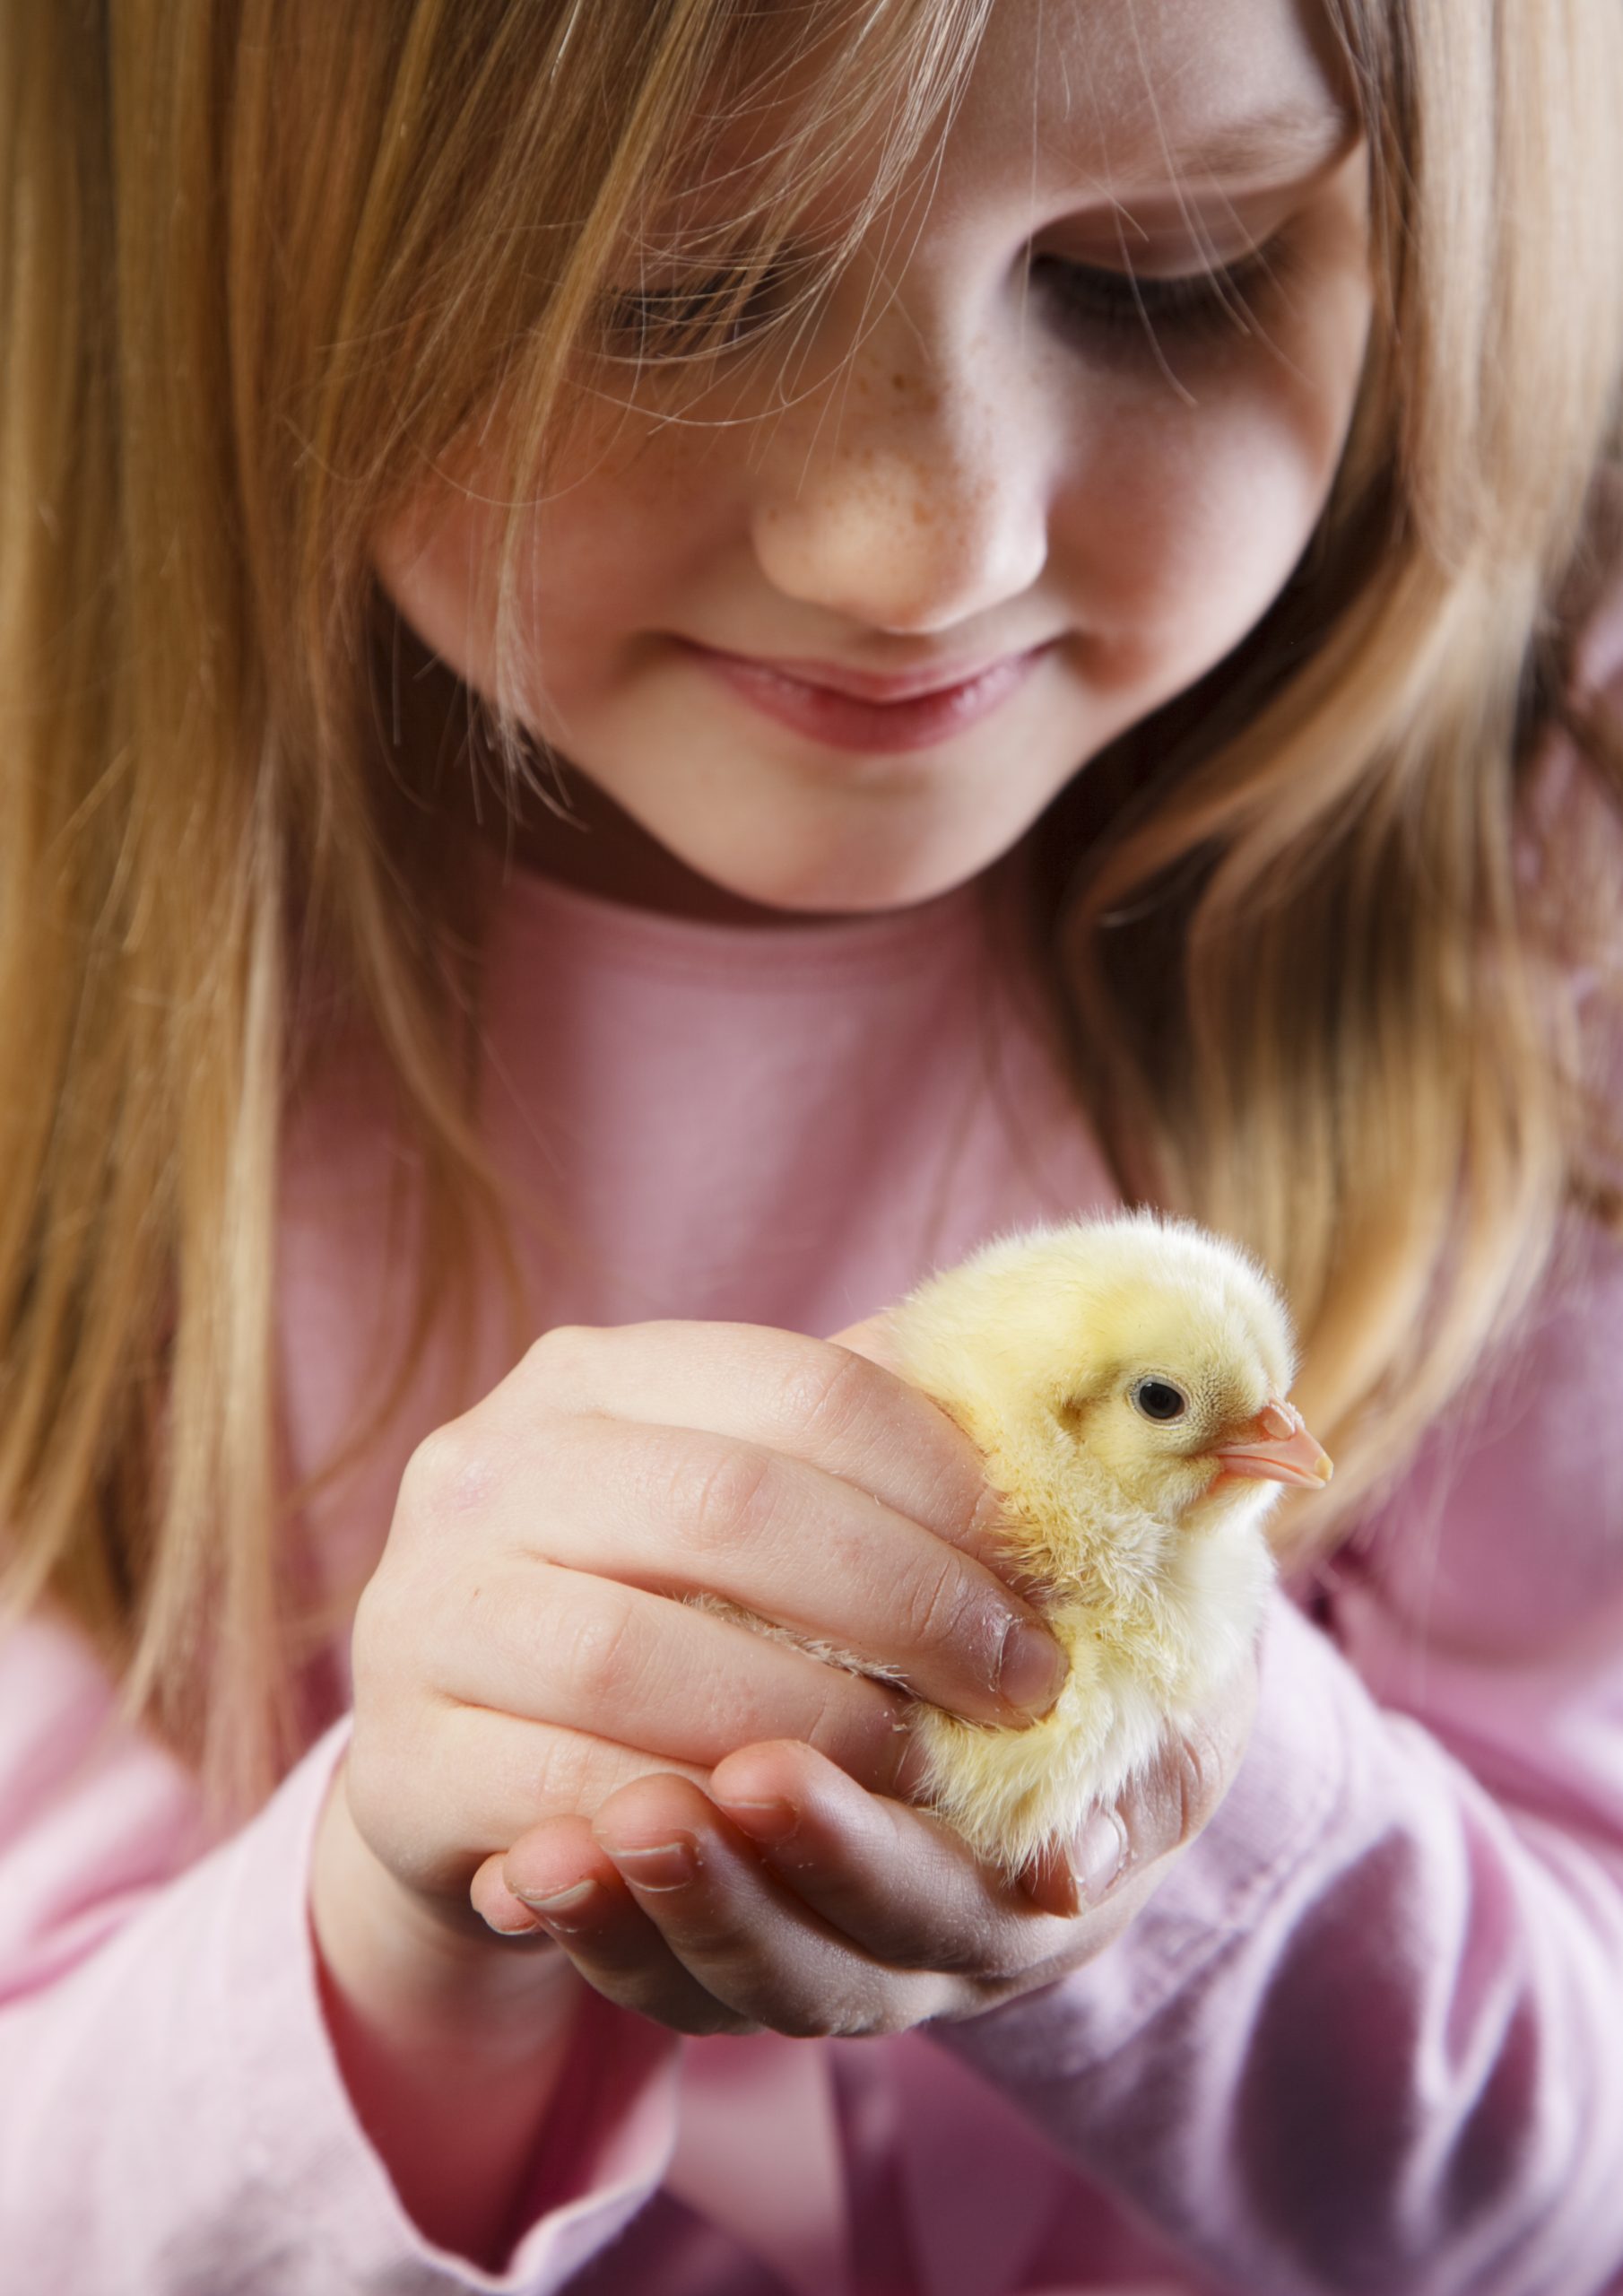 Little Girl holding a Baby Chick